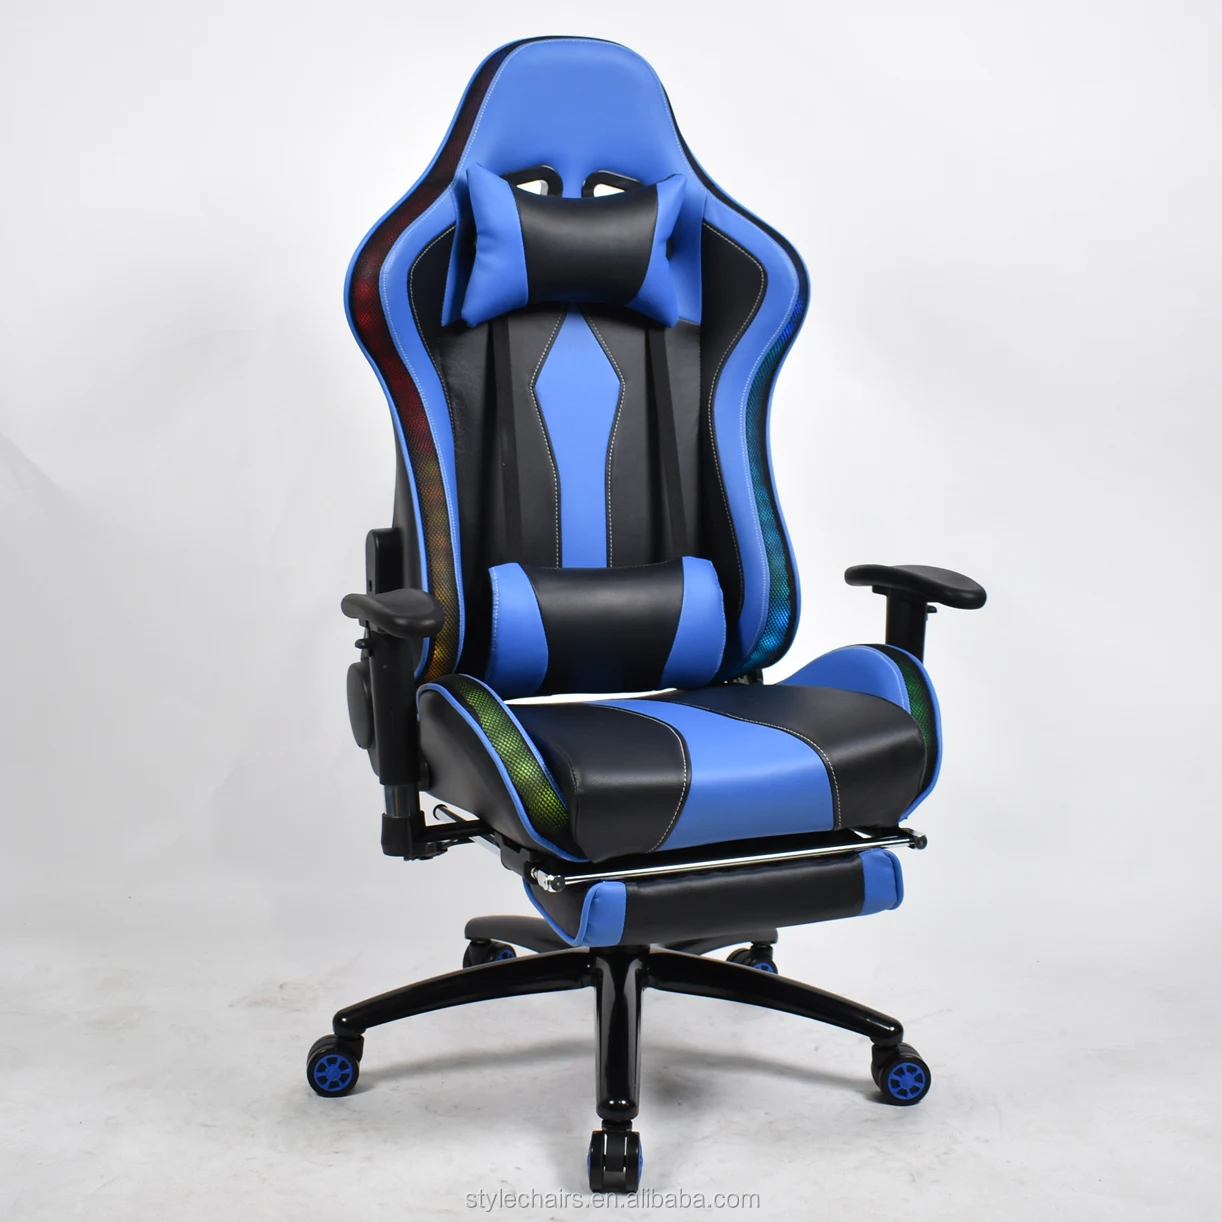 Rgb Led Lighting Silla Gaming Chair For Game Buy Led